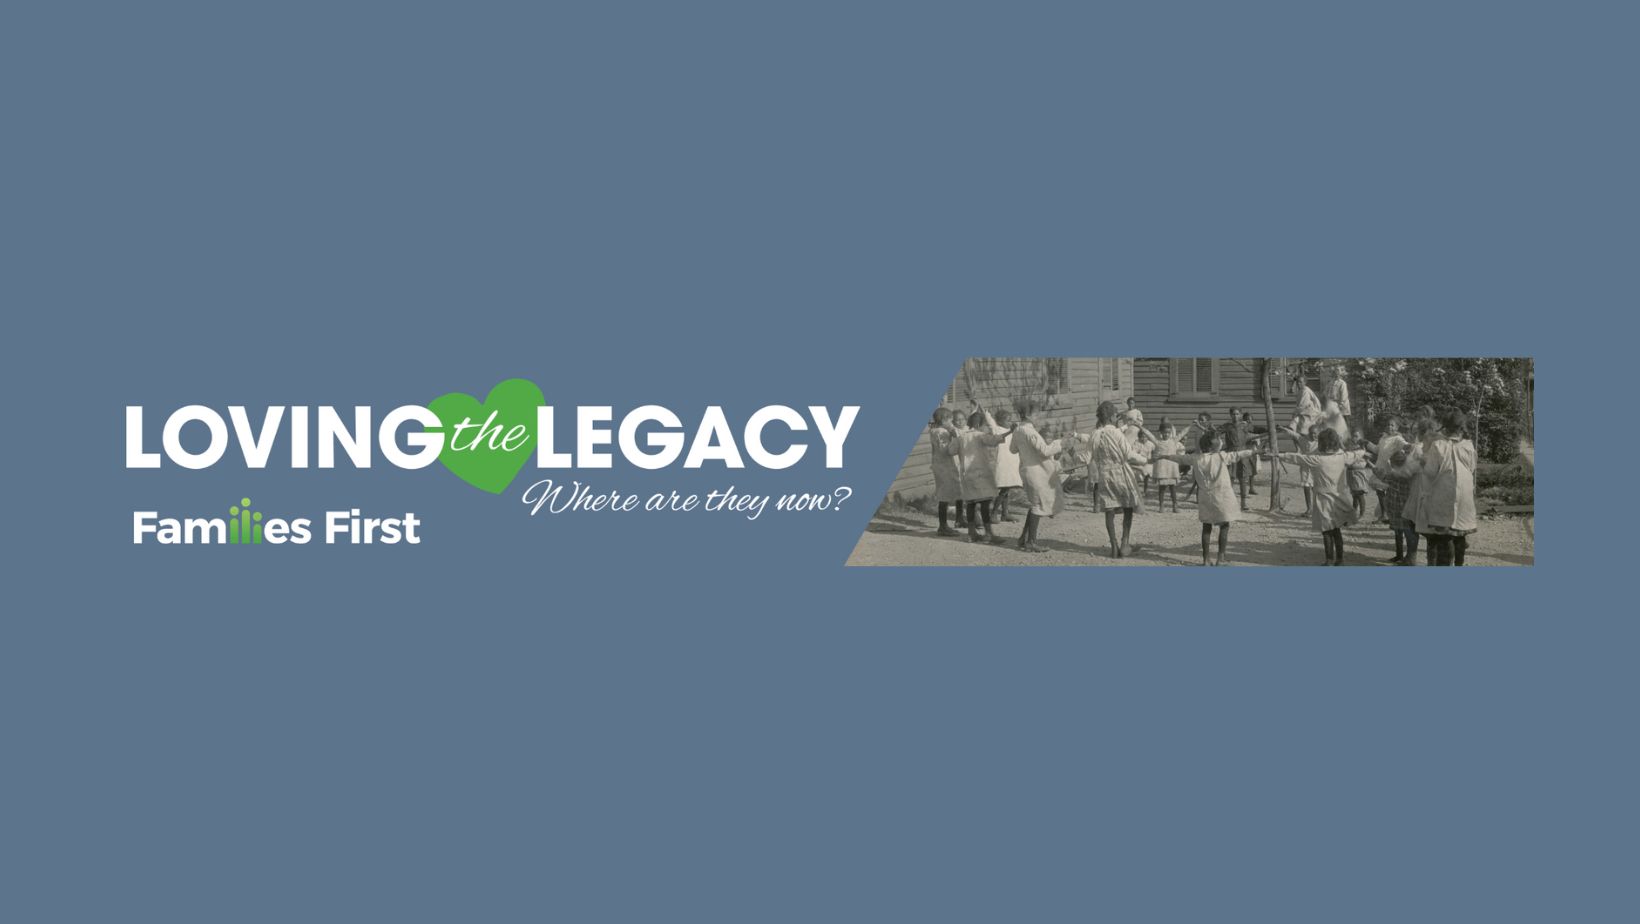 Families First invites you to save the date for fundraising gala “Loving the Legacy”